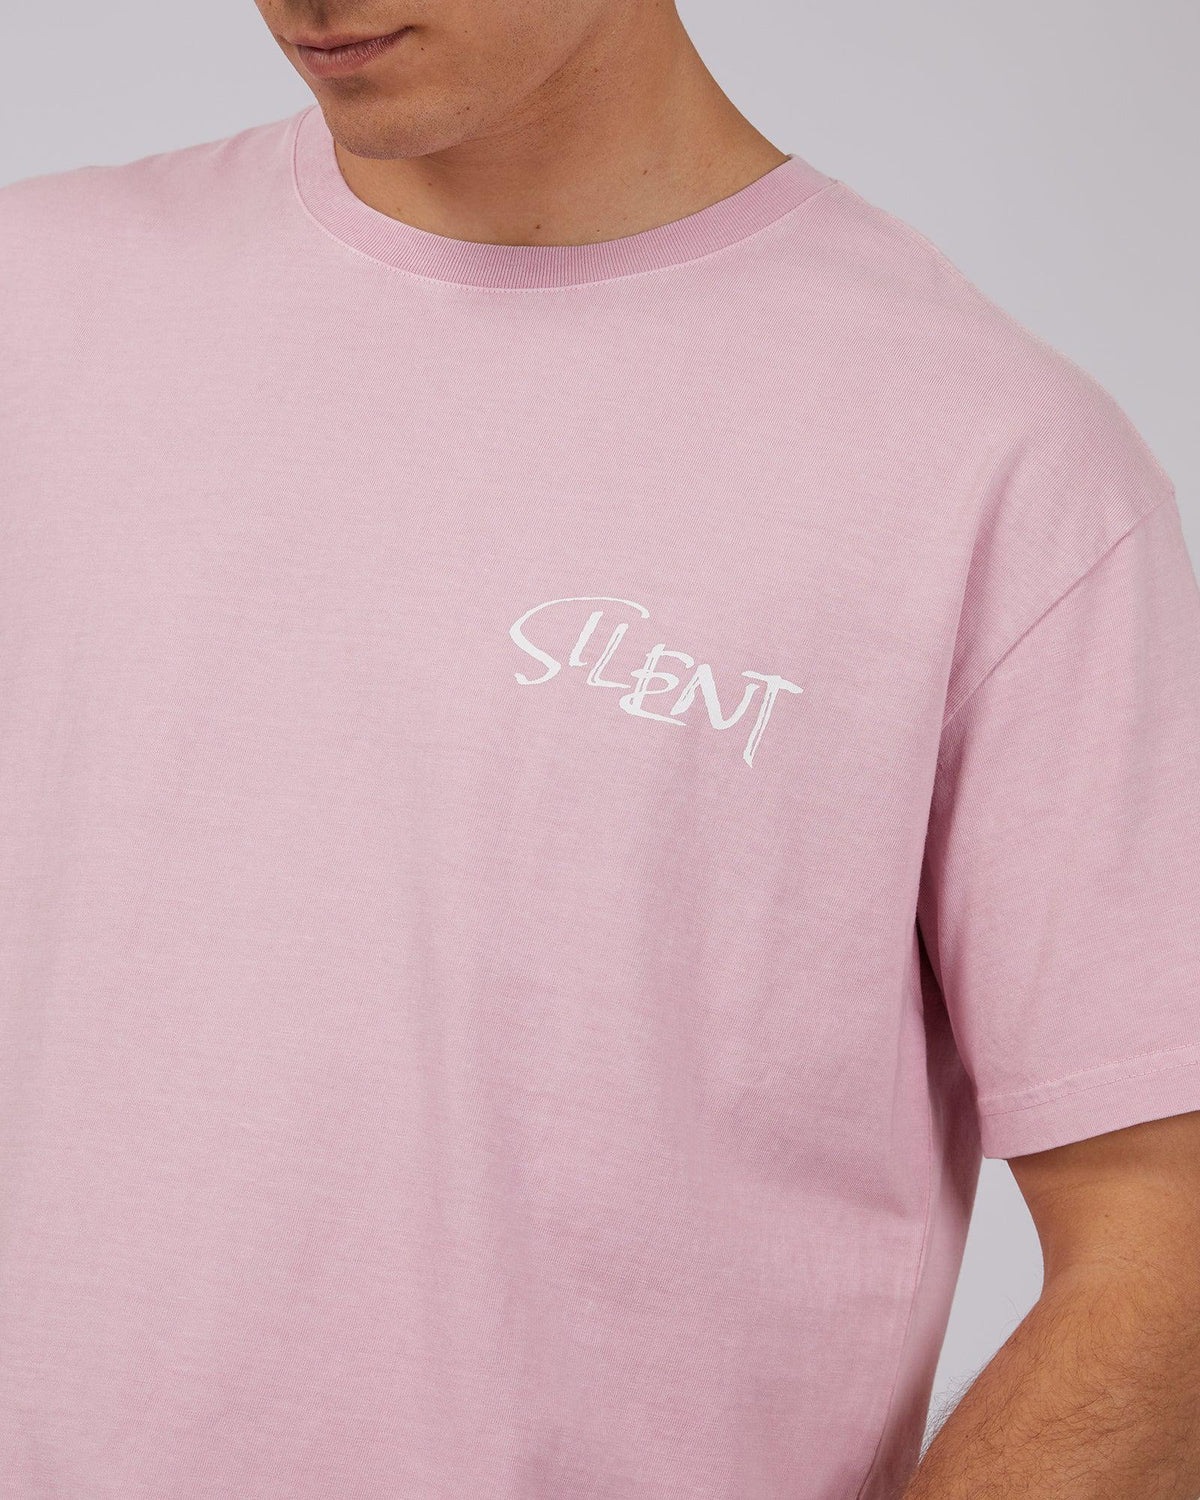 Silent Theory-Jagger Tee Pink-Edge Clothing